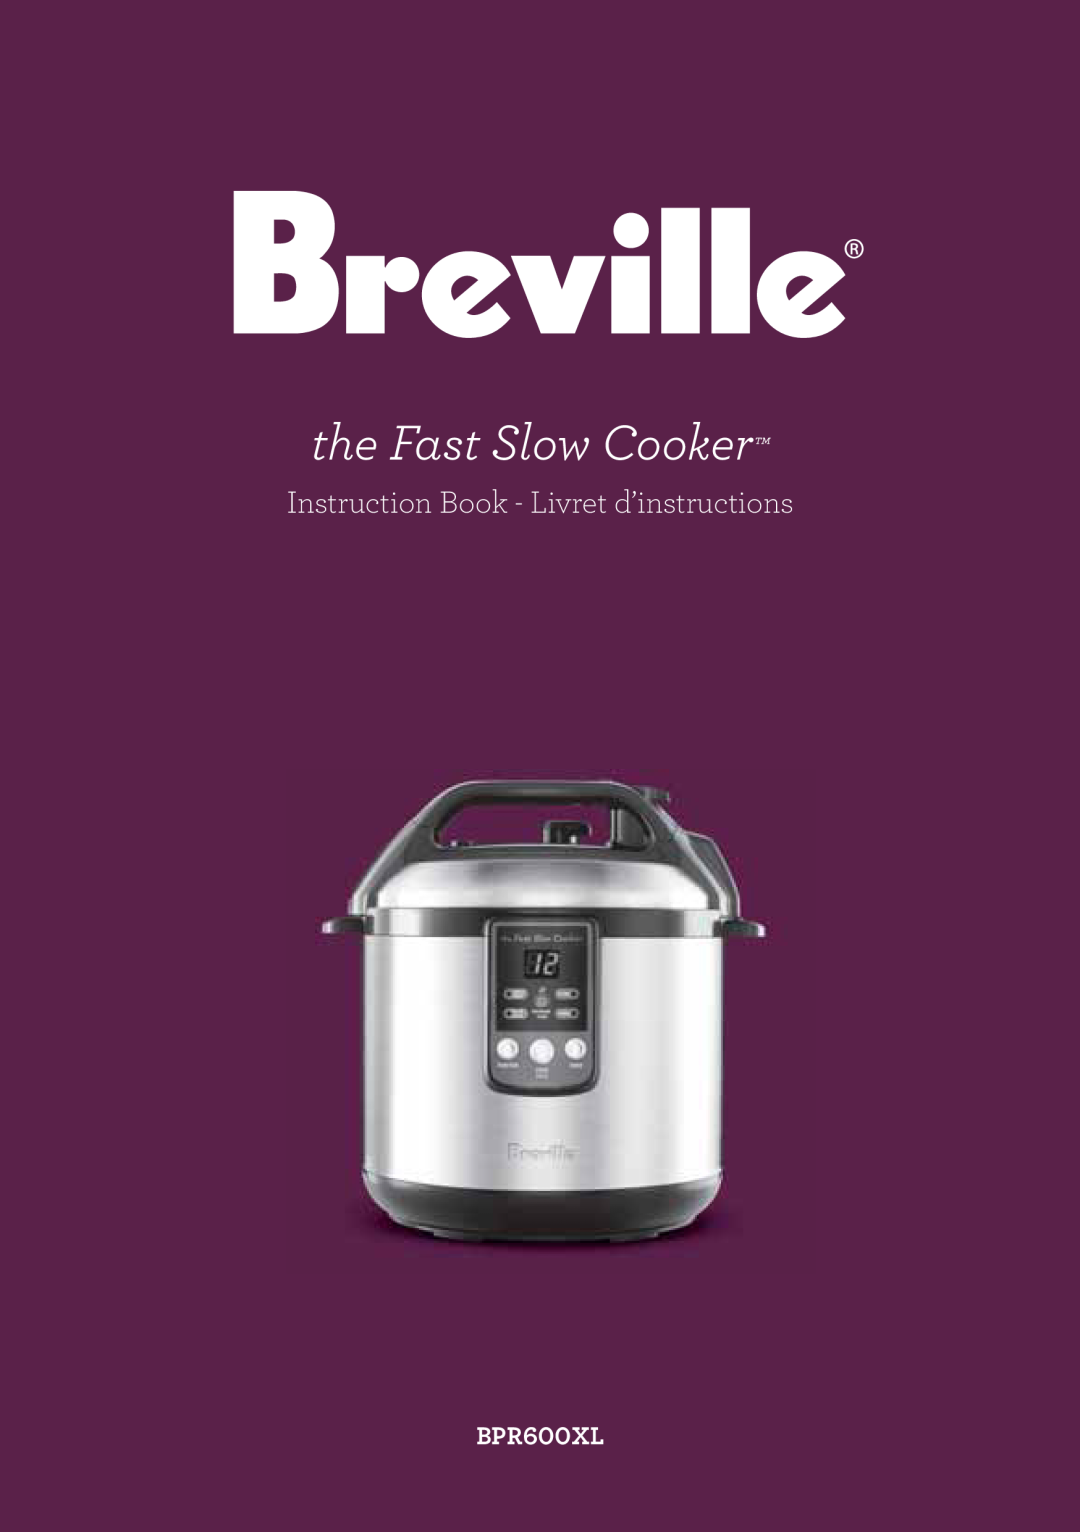 Breville BPR600XL Issue - A12 manual the Fast Slow Cooker, Instruction Book - Livret d’instructions 